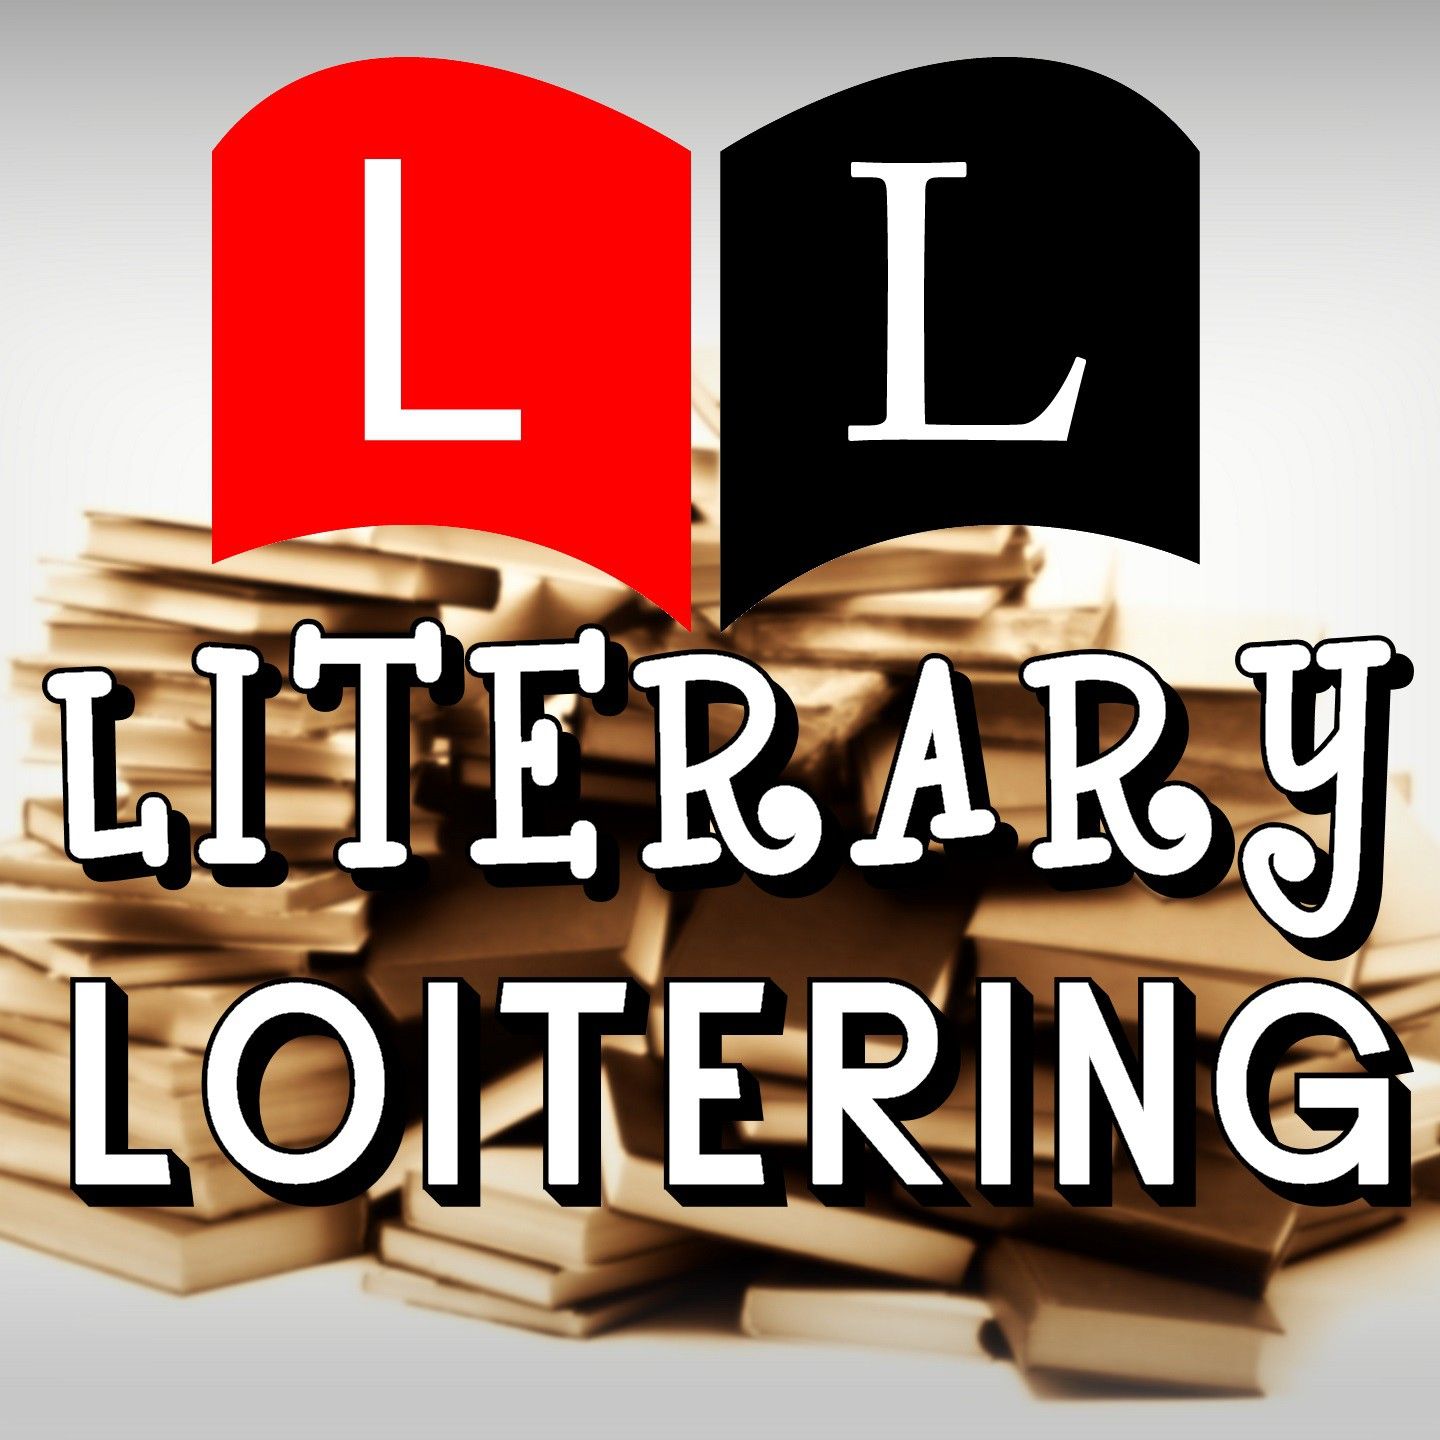 Literary Loitering - Irreverent Mockery With Cultural Anarchists